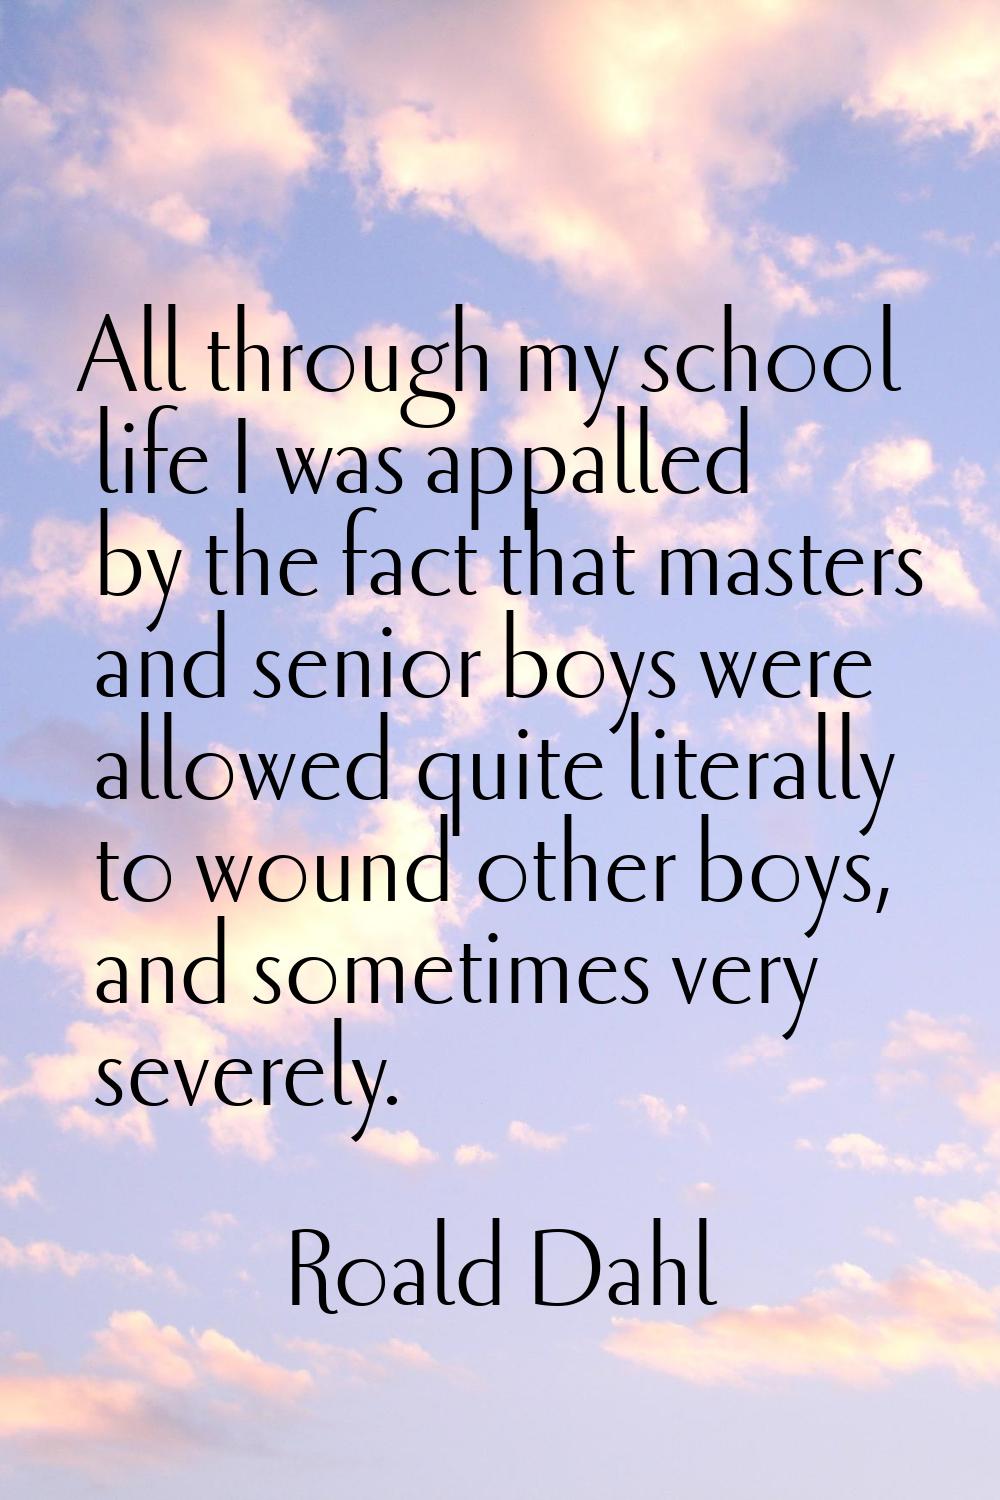 All through my school life I was appalled by the fact that masters and senior boys were allowed qui